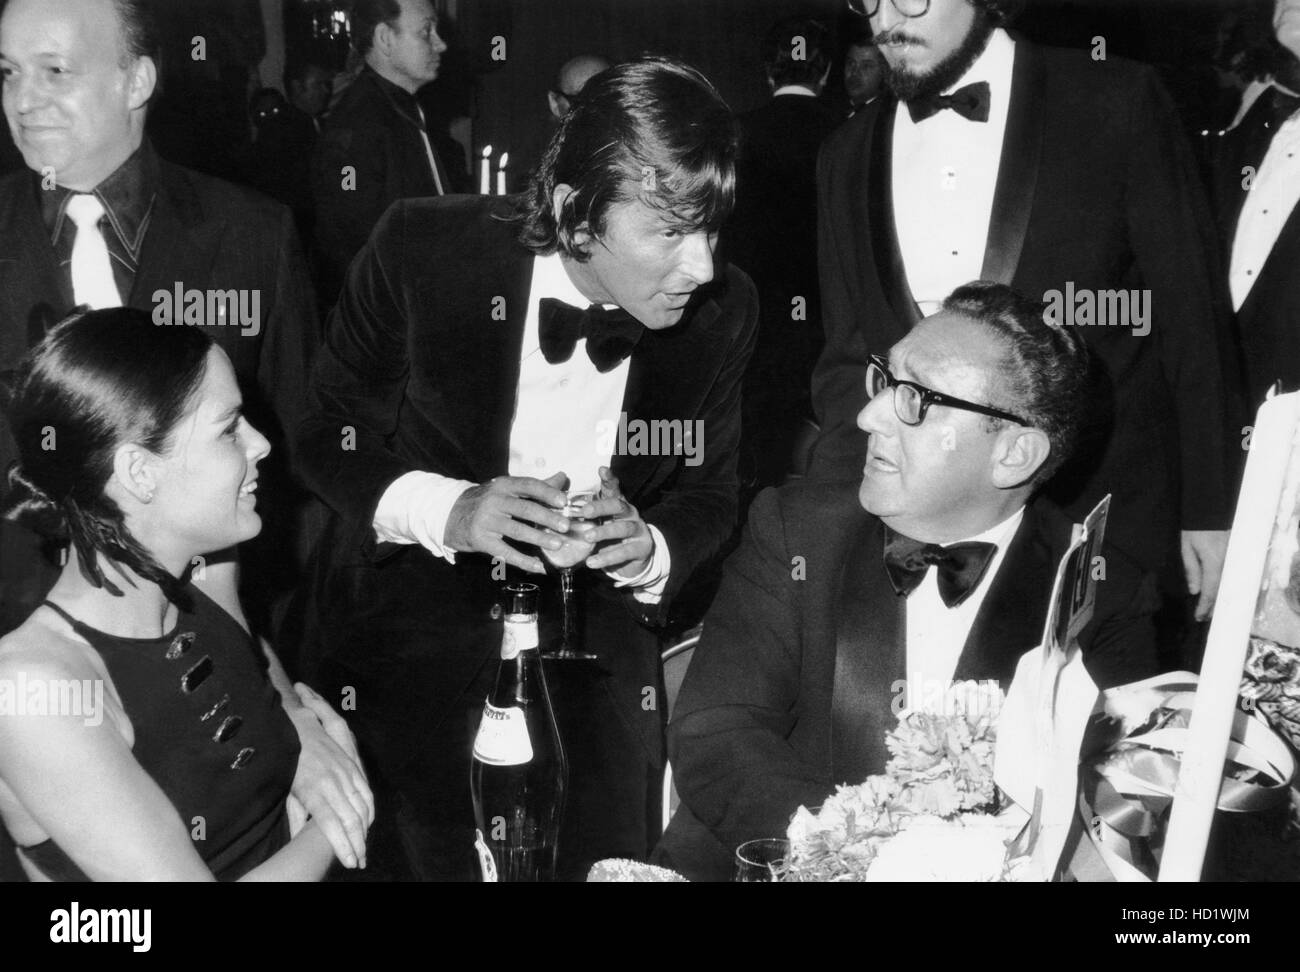 From left, Ali MacGraw, Robert Evans, Henry Kissinger, at the premiere party for THE GODFATHER, St. Regis Hotel, March 14, 1972 Stock Photo